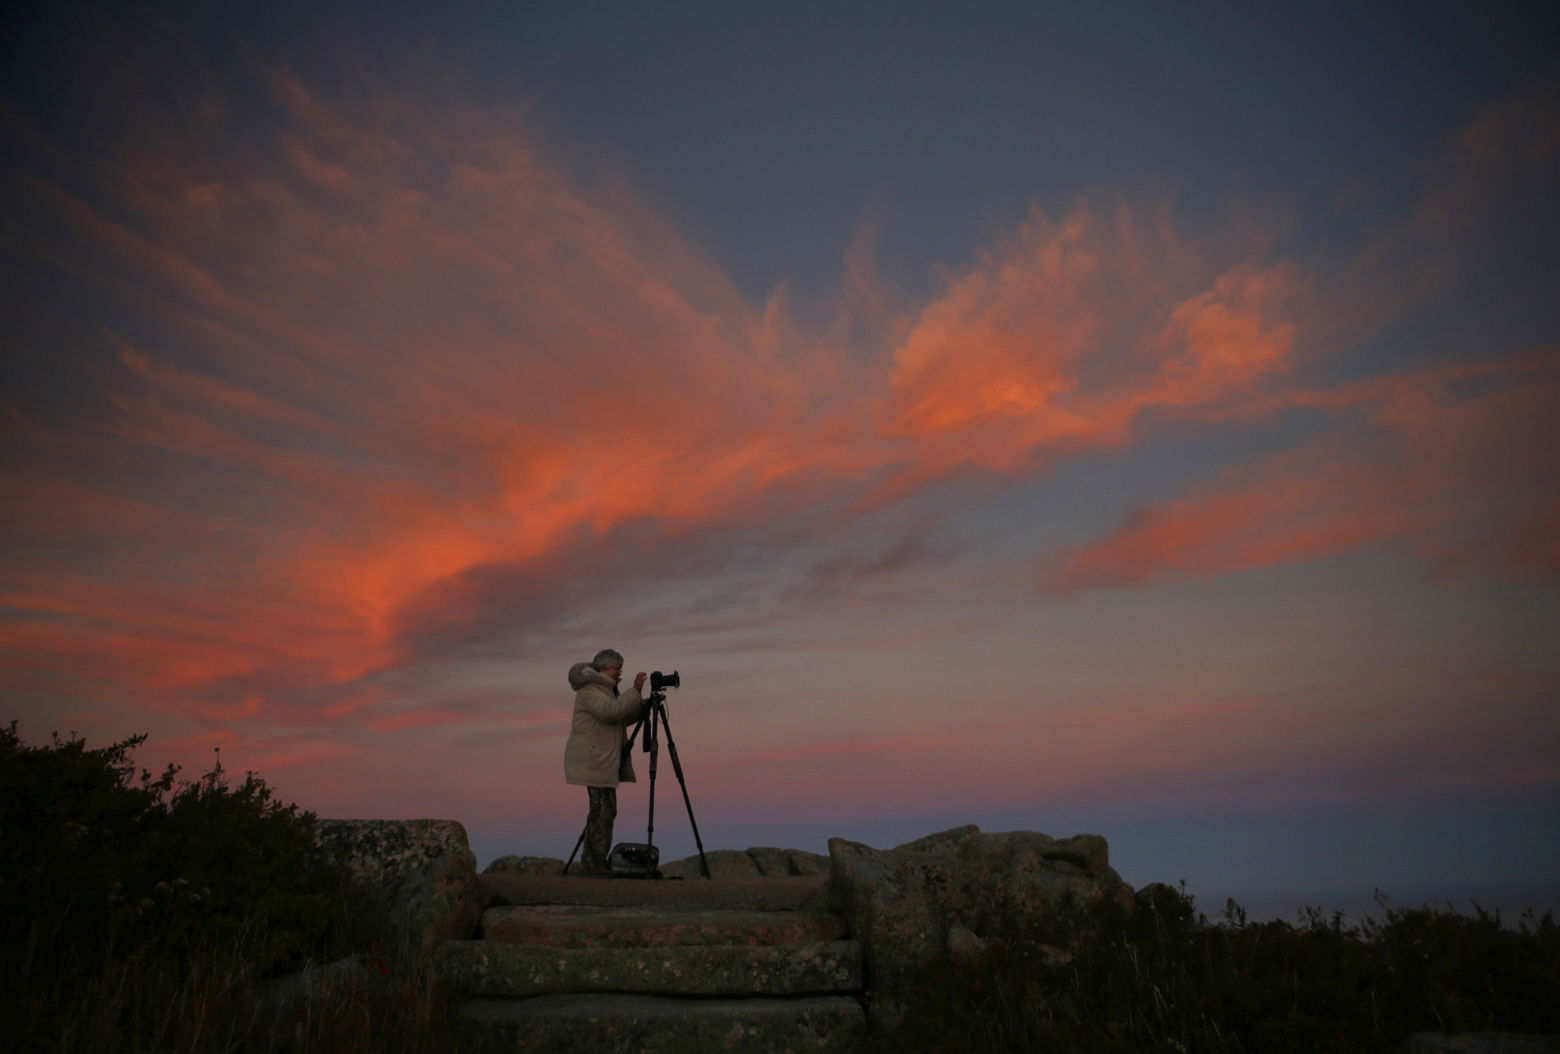 Cindy Archbell photographs the landscape of Acadia National Park in Maine from the summit of Cadillac Mountain at sunset, Thursday, Oct. 2, 2014. Archbell, of Culpepper, Va., is spending a week in the park pursuing her photographic hobby.  "The first day I was here I spent 10 hours shooting," she said. (AP Photo/Robert F. Bukaty)